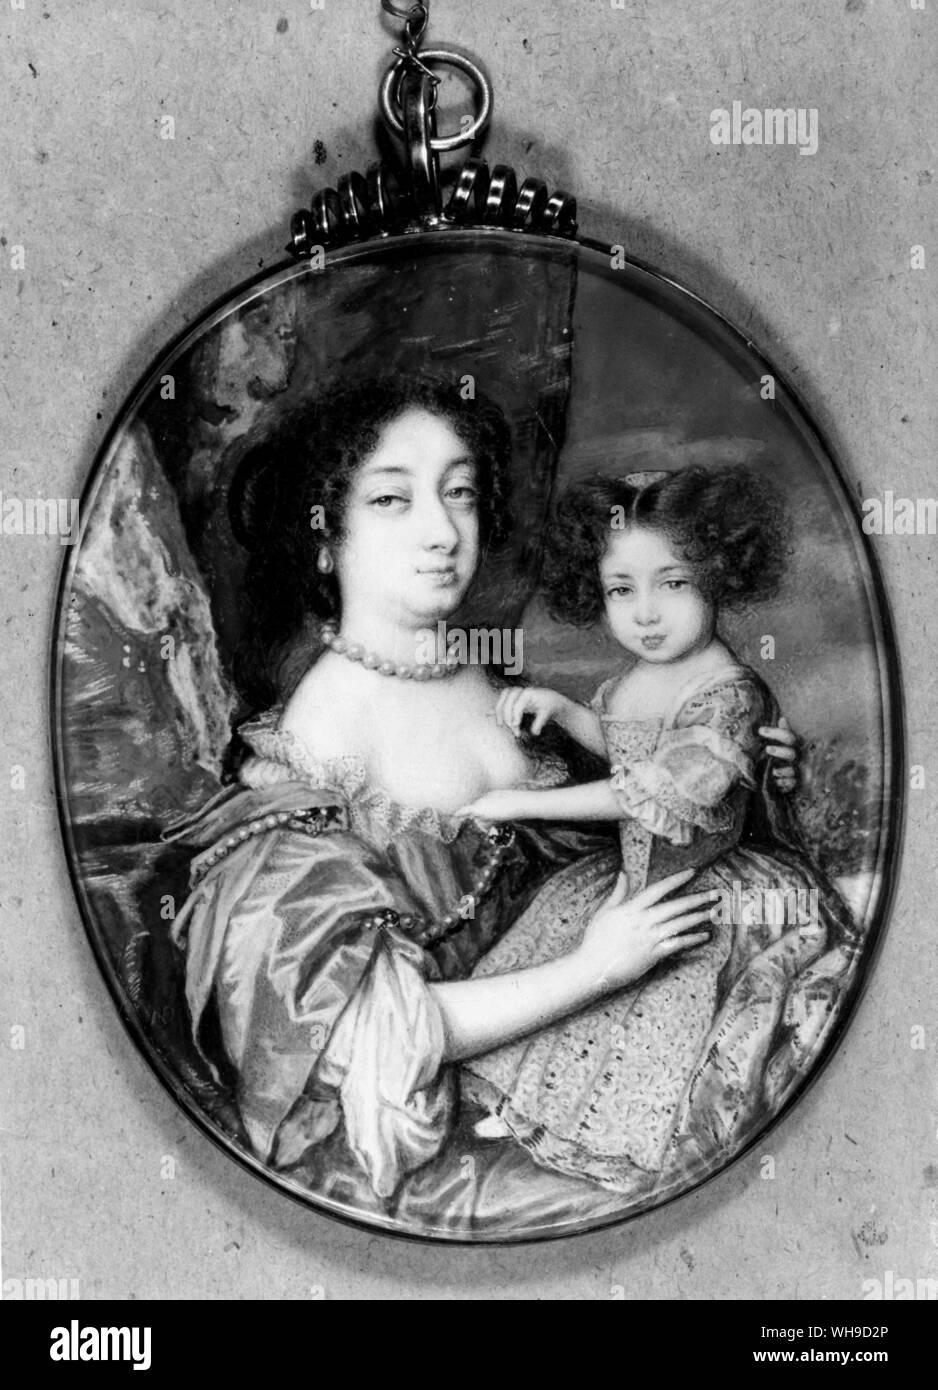 Barbara, Countess of Castlemaine (1641-1709). Mistress of Charles II of England, 1660-70 and mother of his son, the Duke of Grafton (1663-90). Born Barbara Villiers. By Nicholas Dixon Stock Photo